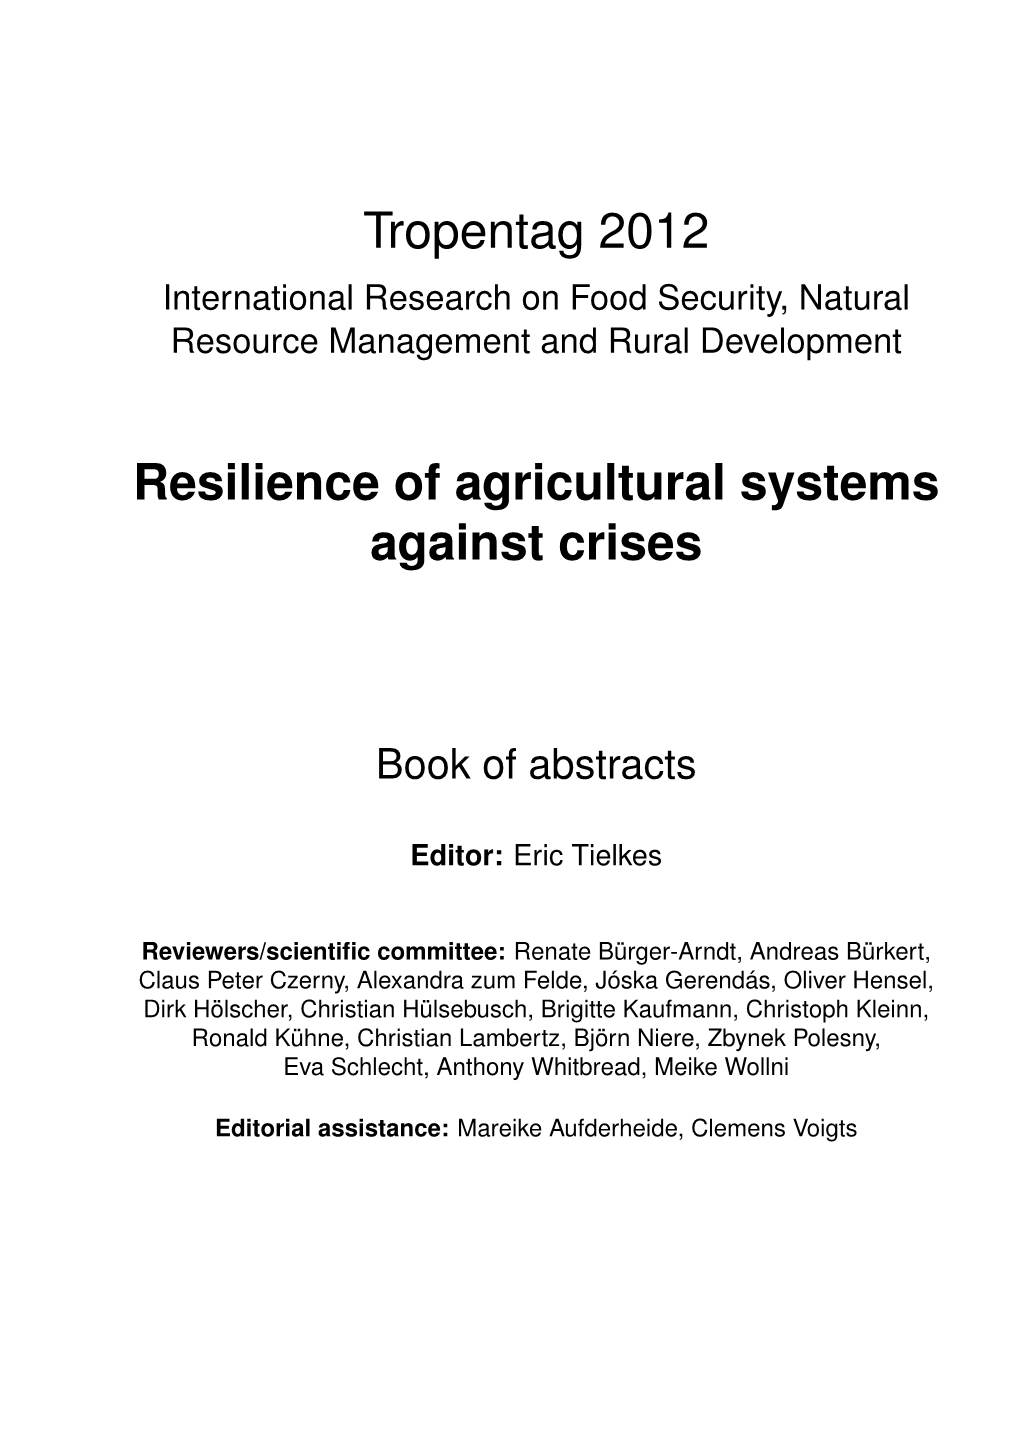 Resilience of Agricultural Systems Against Crises